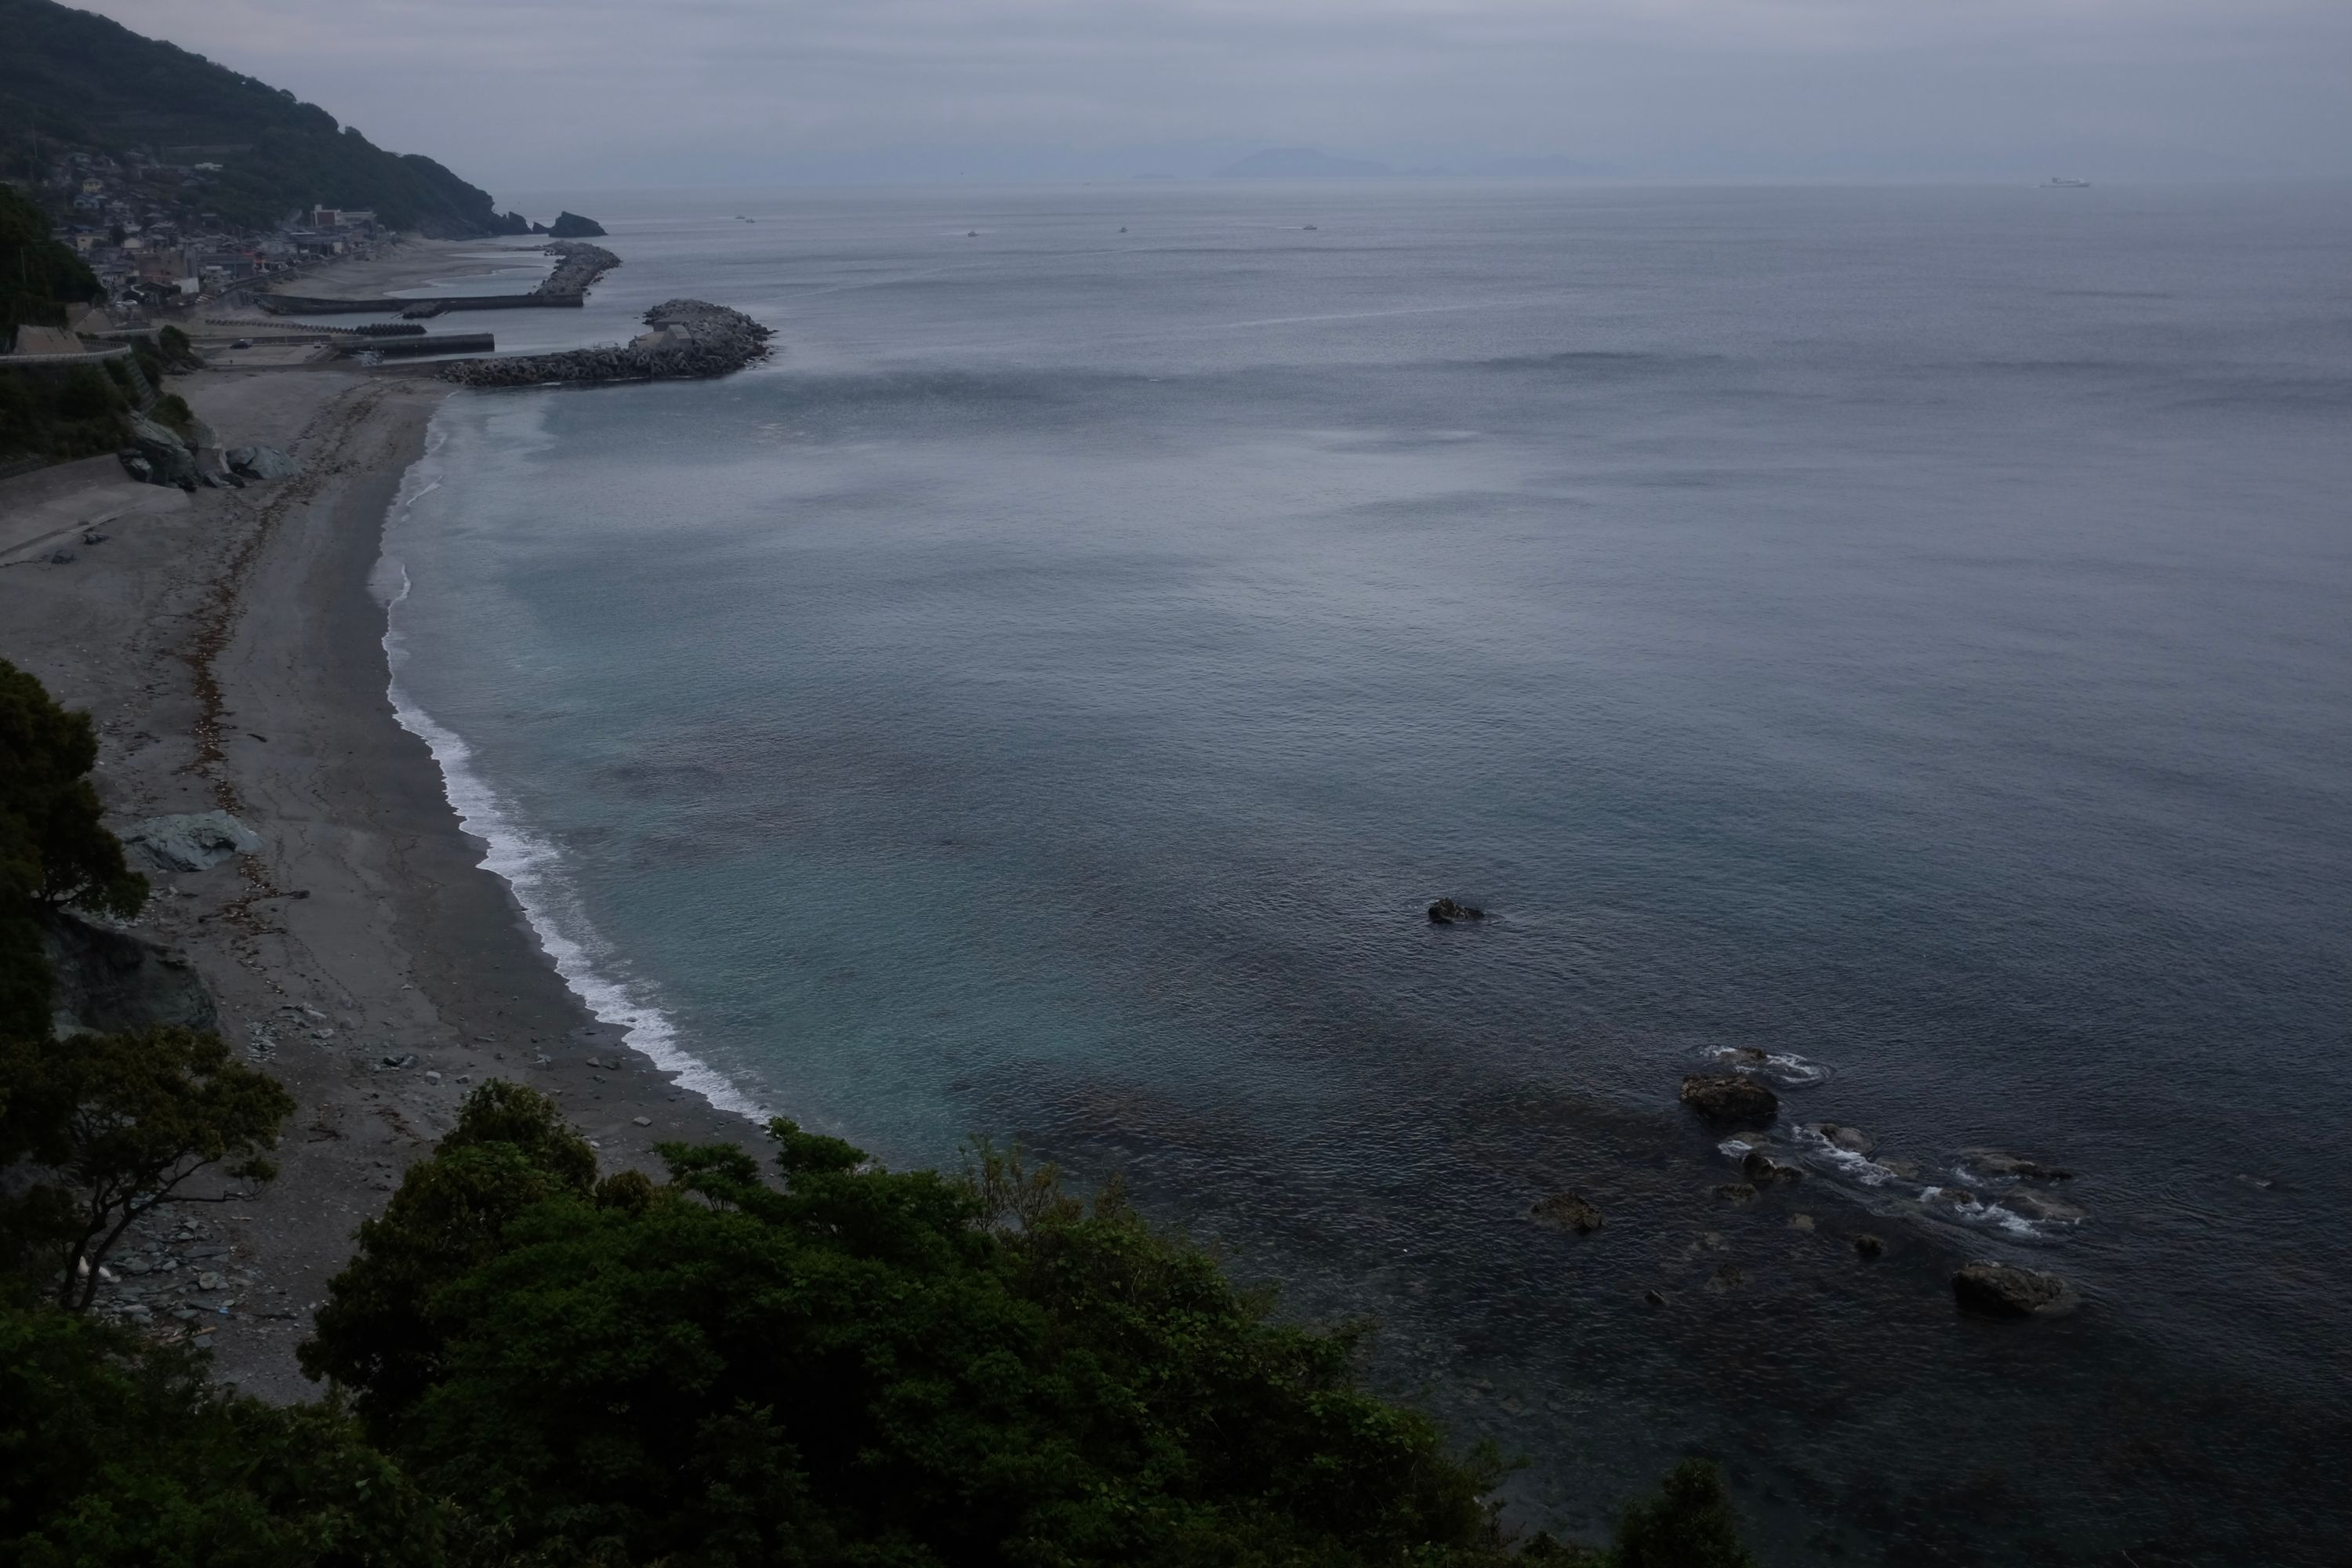 Looking out under an overcast sky over the sea and the village of Ōku.